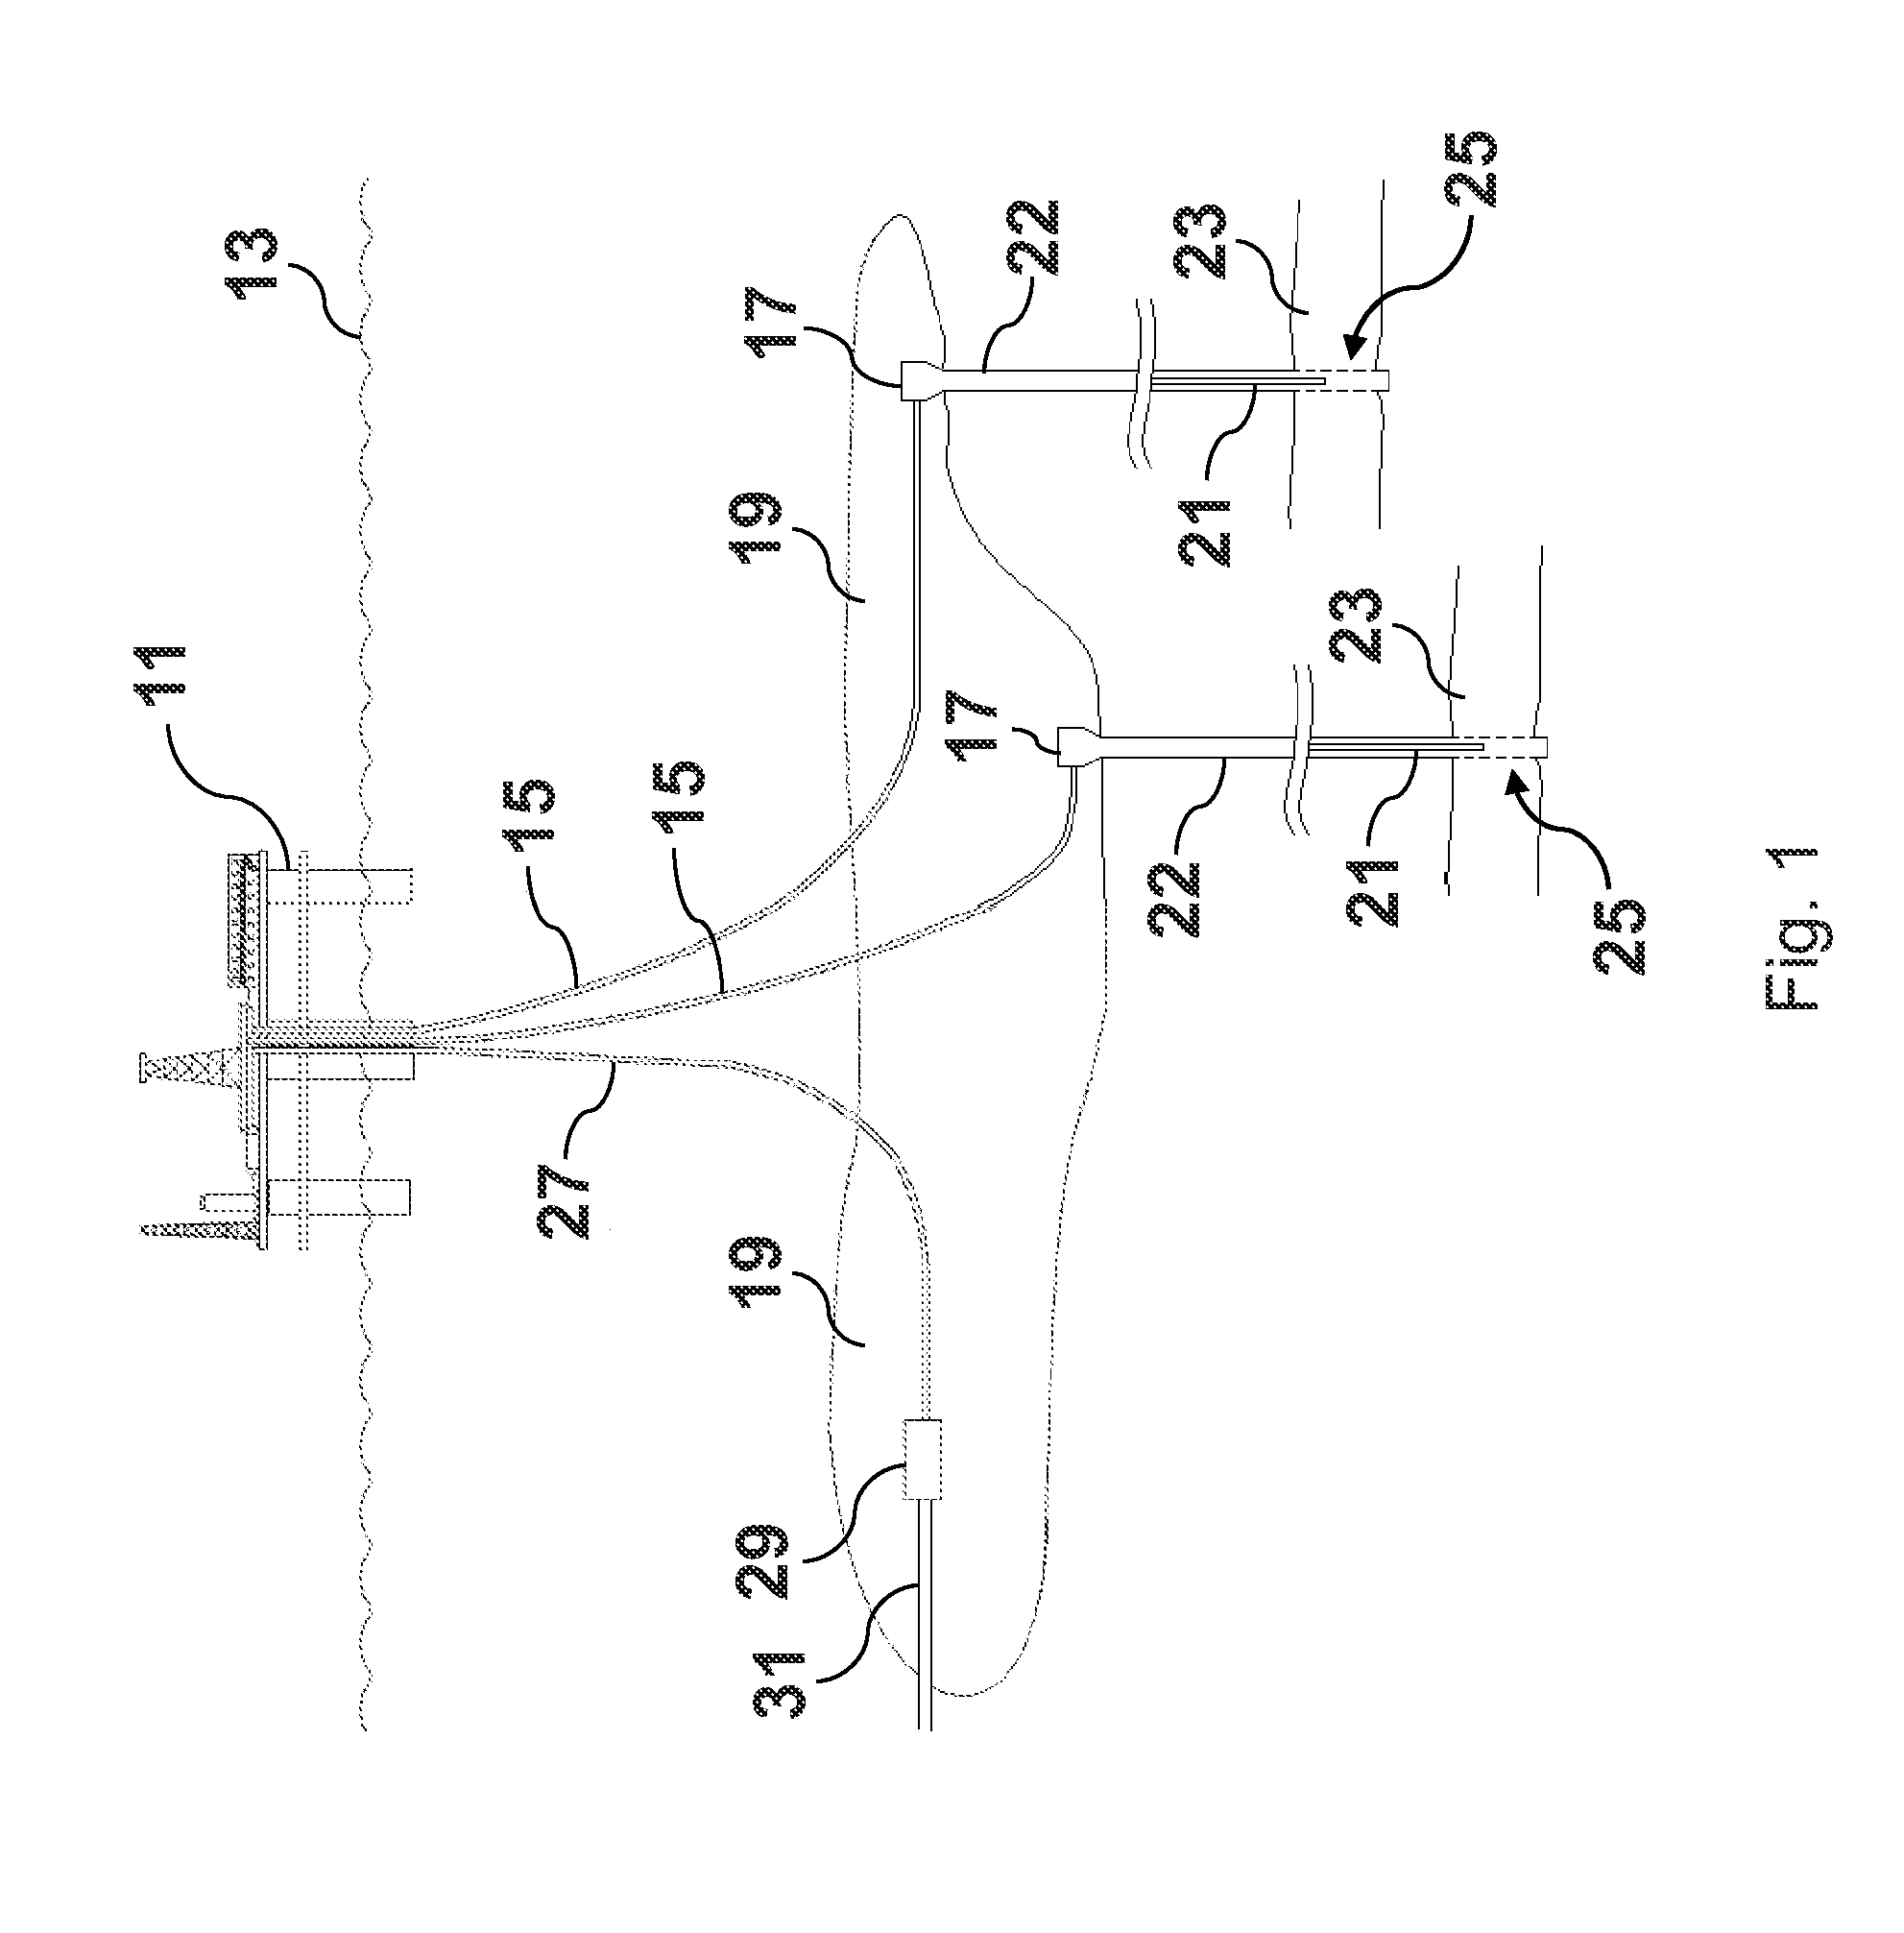 System and method for producing hydrocarbons from a well